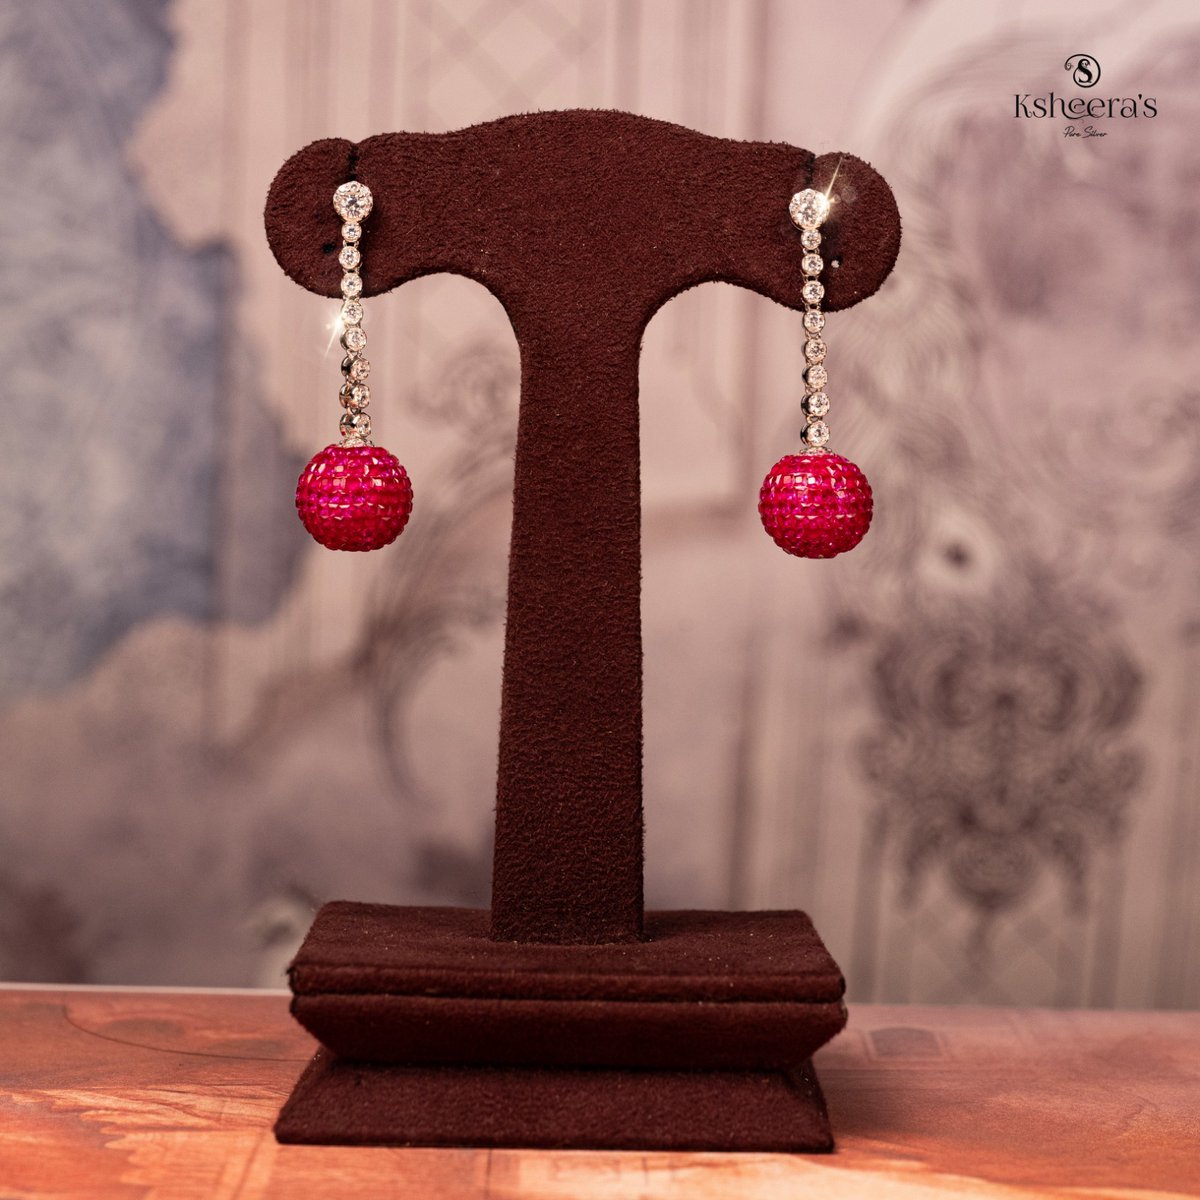 Bring a majestic flair to your accessories with the exquisite designs from Ksheera’s Jewelry!

#ksheeras #jewellery #jewelry #cocktailjewellery #partywear #jewelryaddict #jewelery #trending #trendingnow #trendingfashion #earrings #earringsoftheday #earringsofinstagram